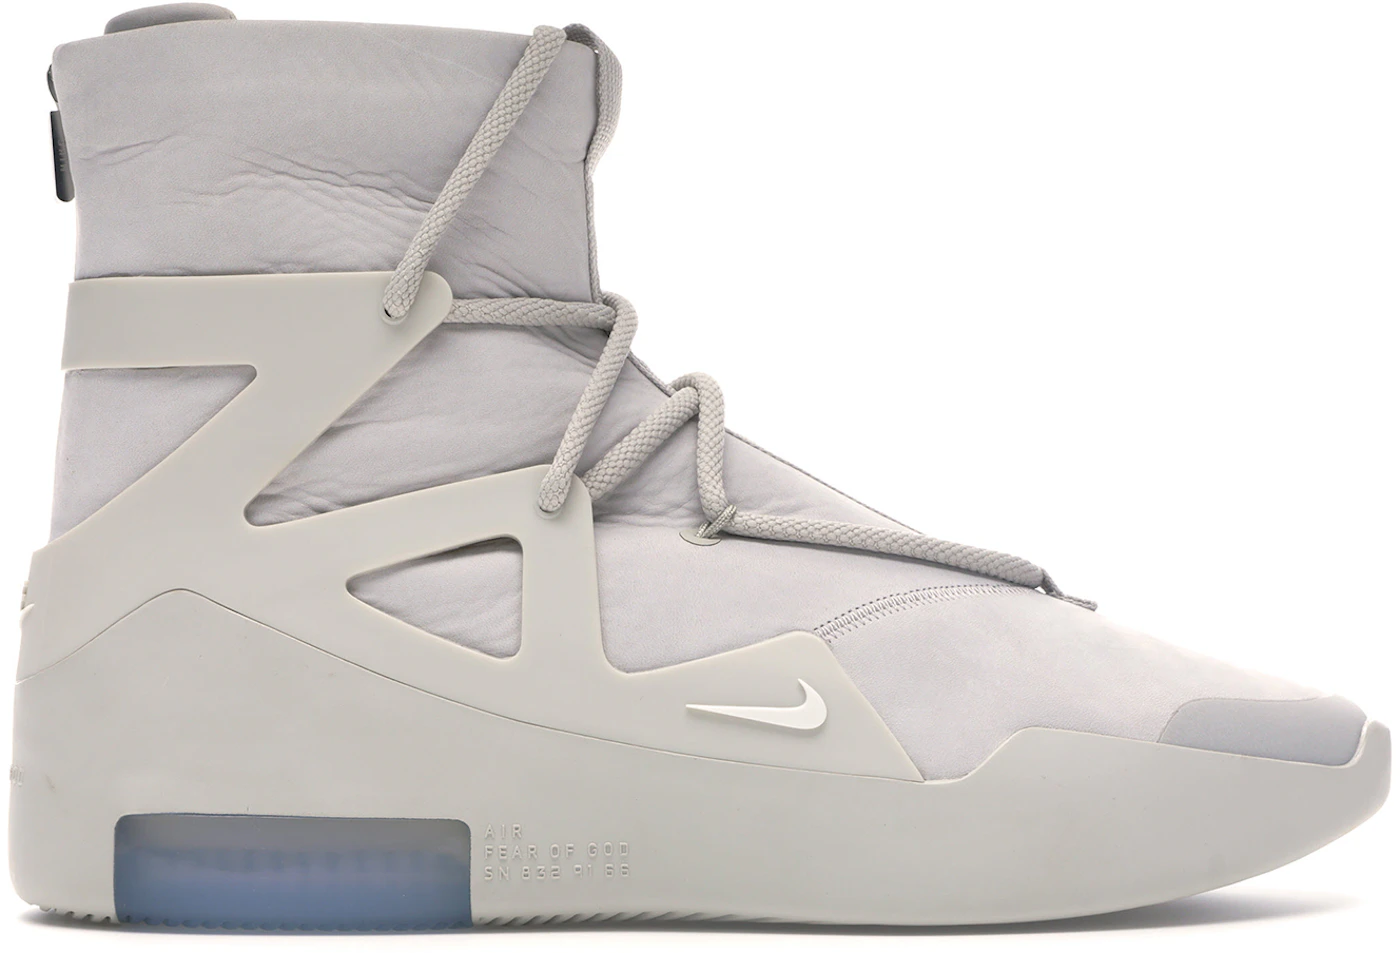 Wrap selvmord renhed Nike Air Fear Of God 1 Light Bone (Friends and Family) Men's - AR4237-003 -  US